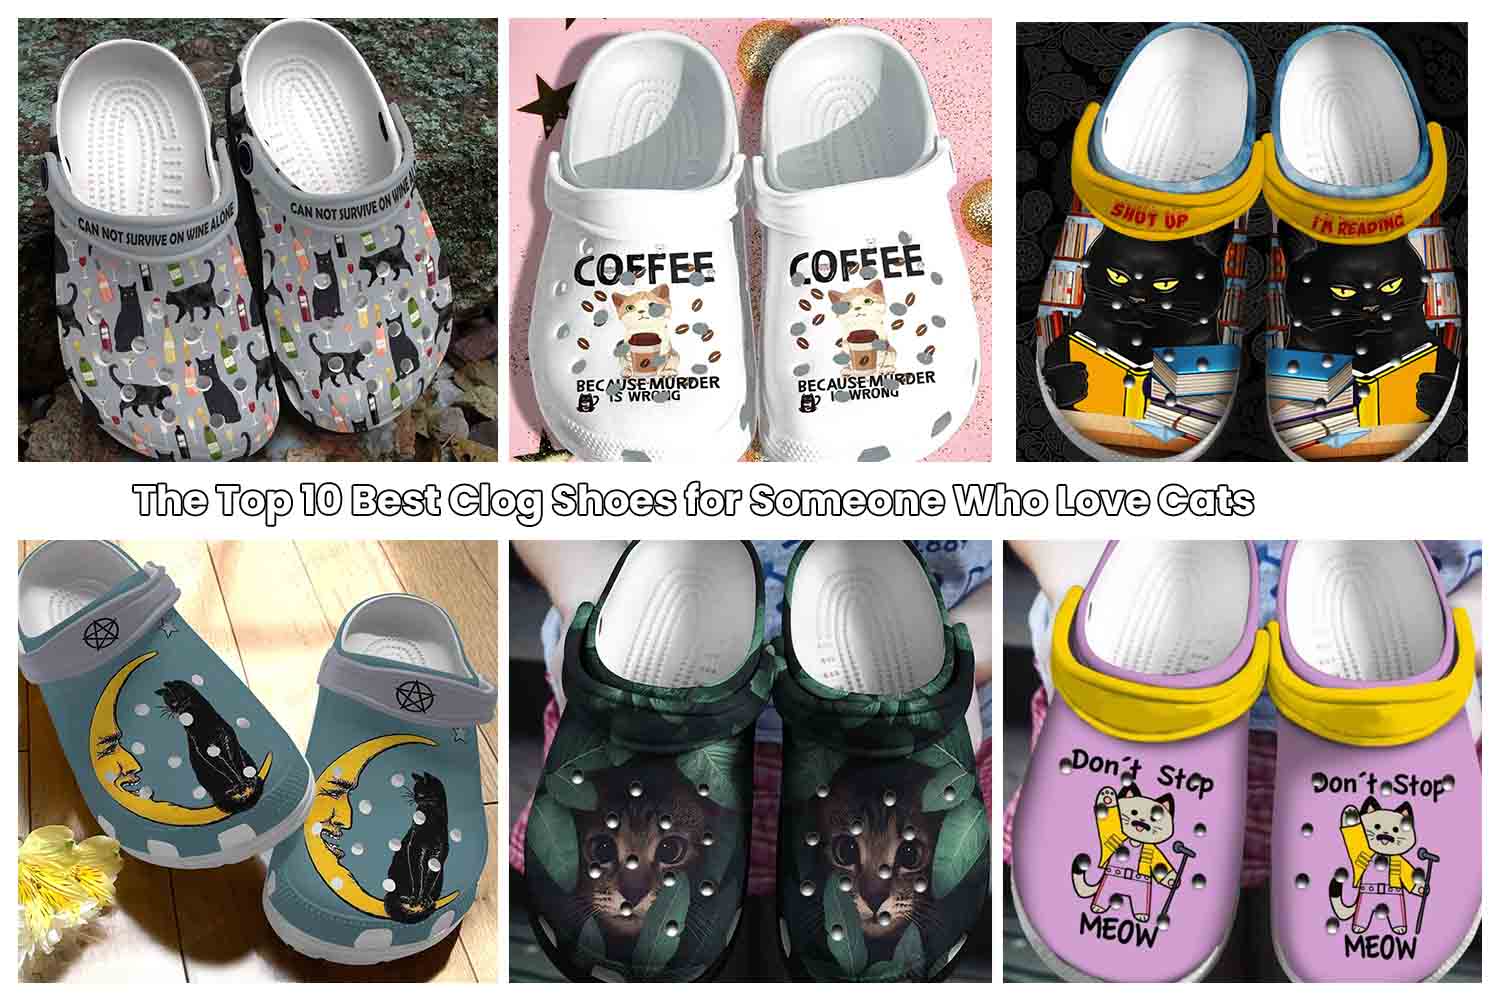 The Top 10 Best Clog Shoes for Someone Who Love Cats